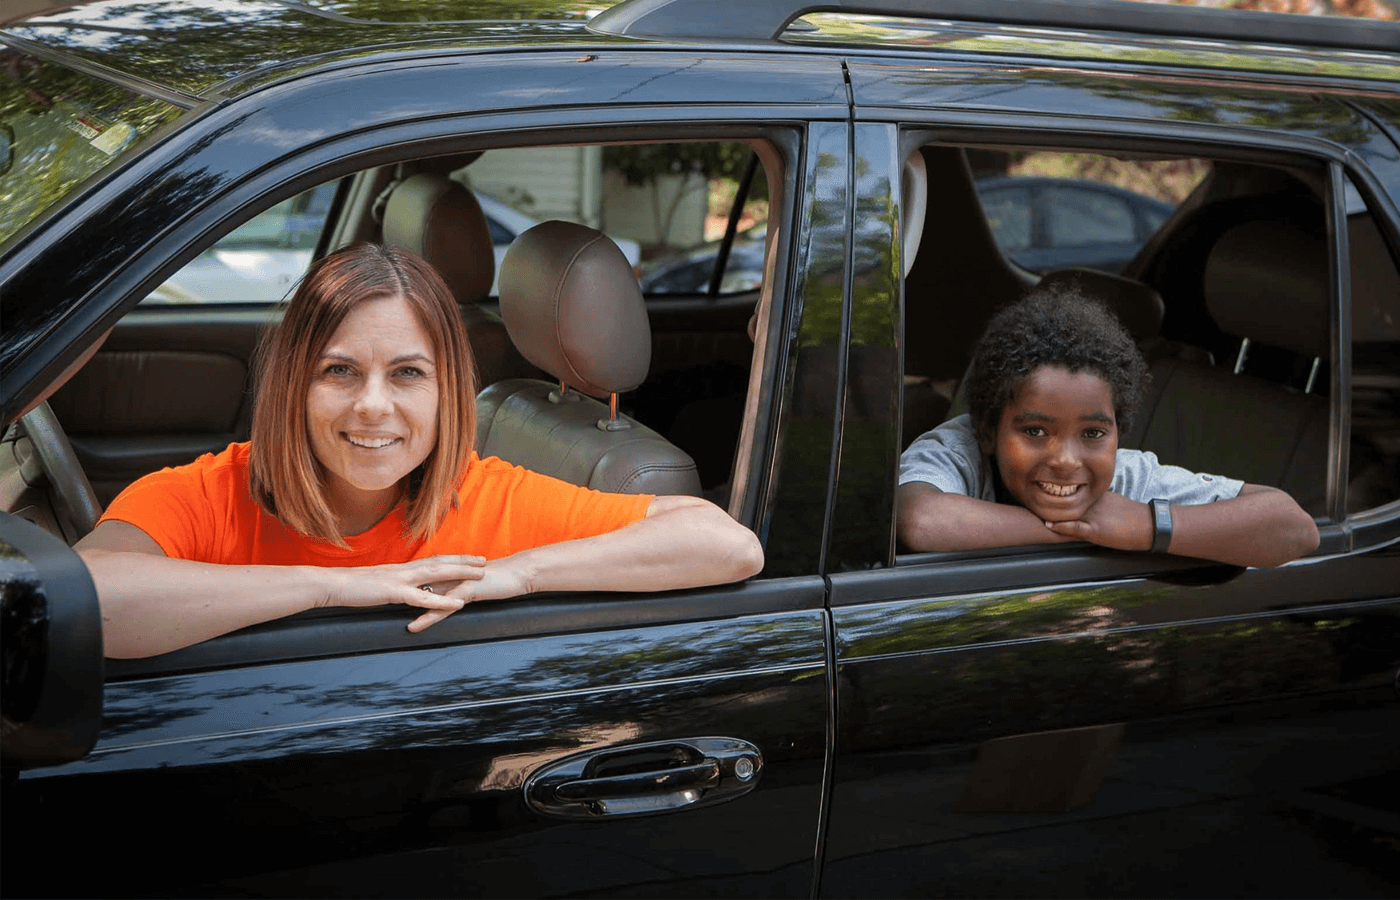 HopSkipDrive offers an innovative alternative in transporting students to and from school.